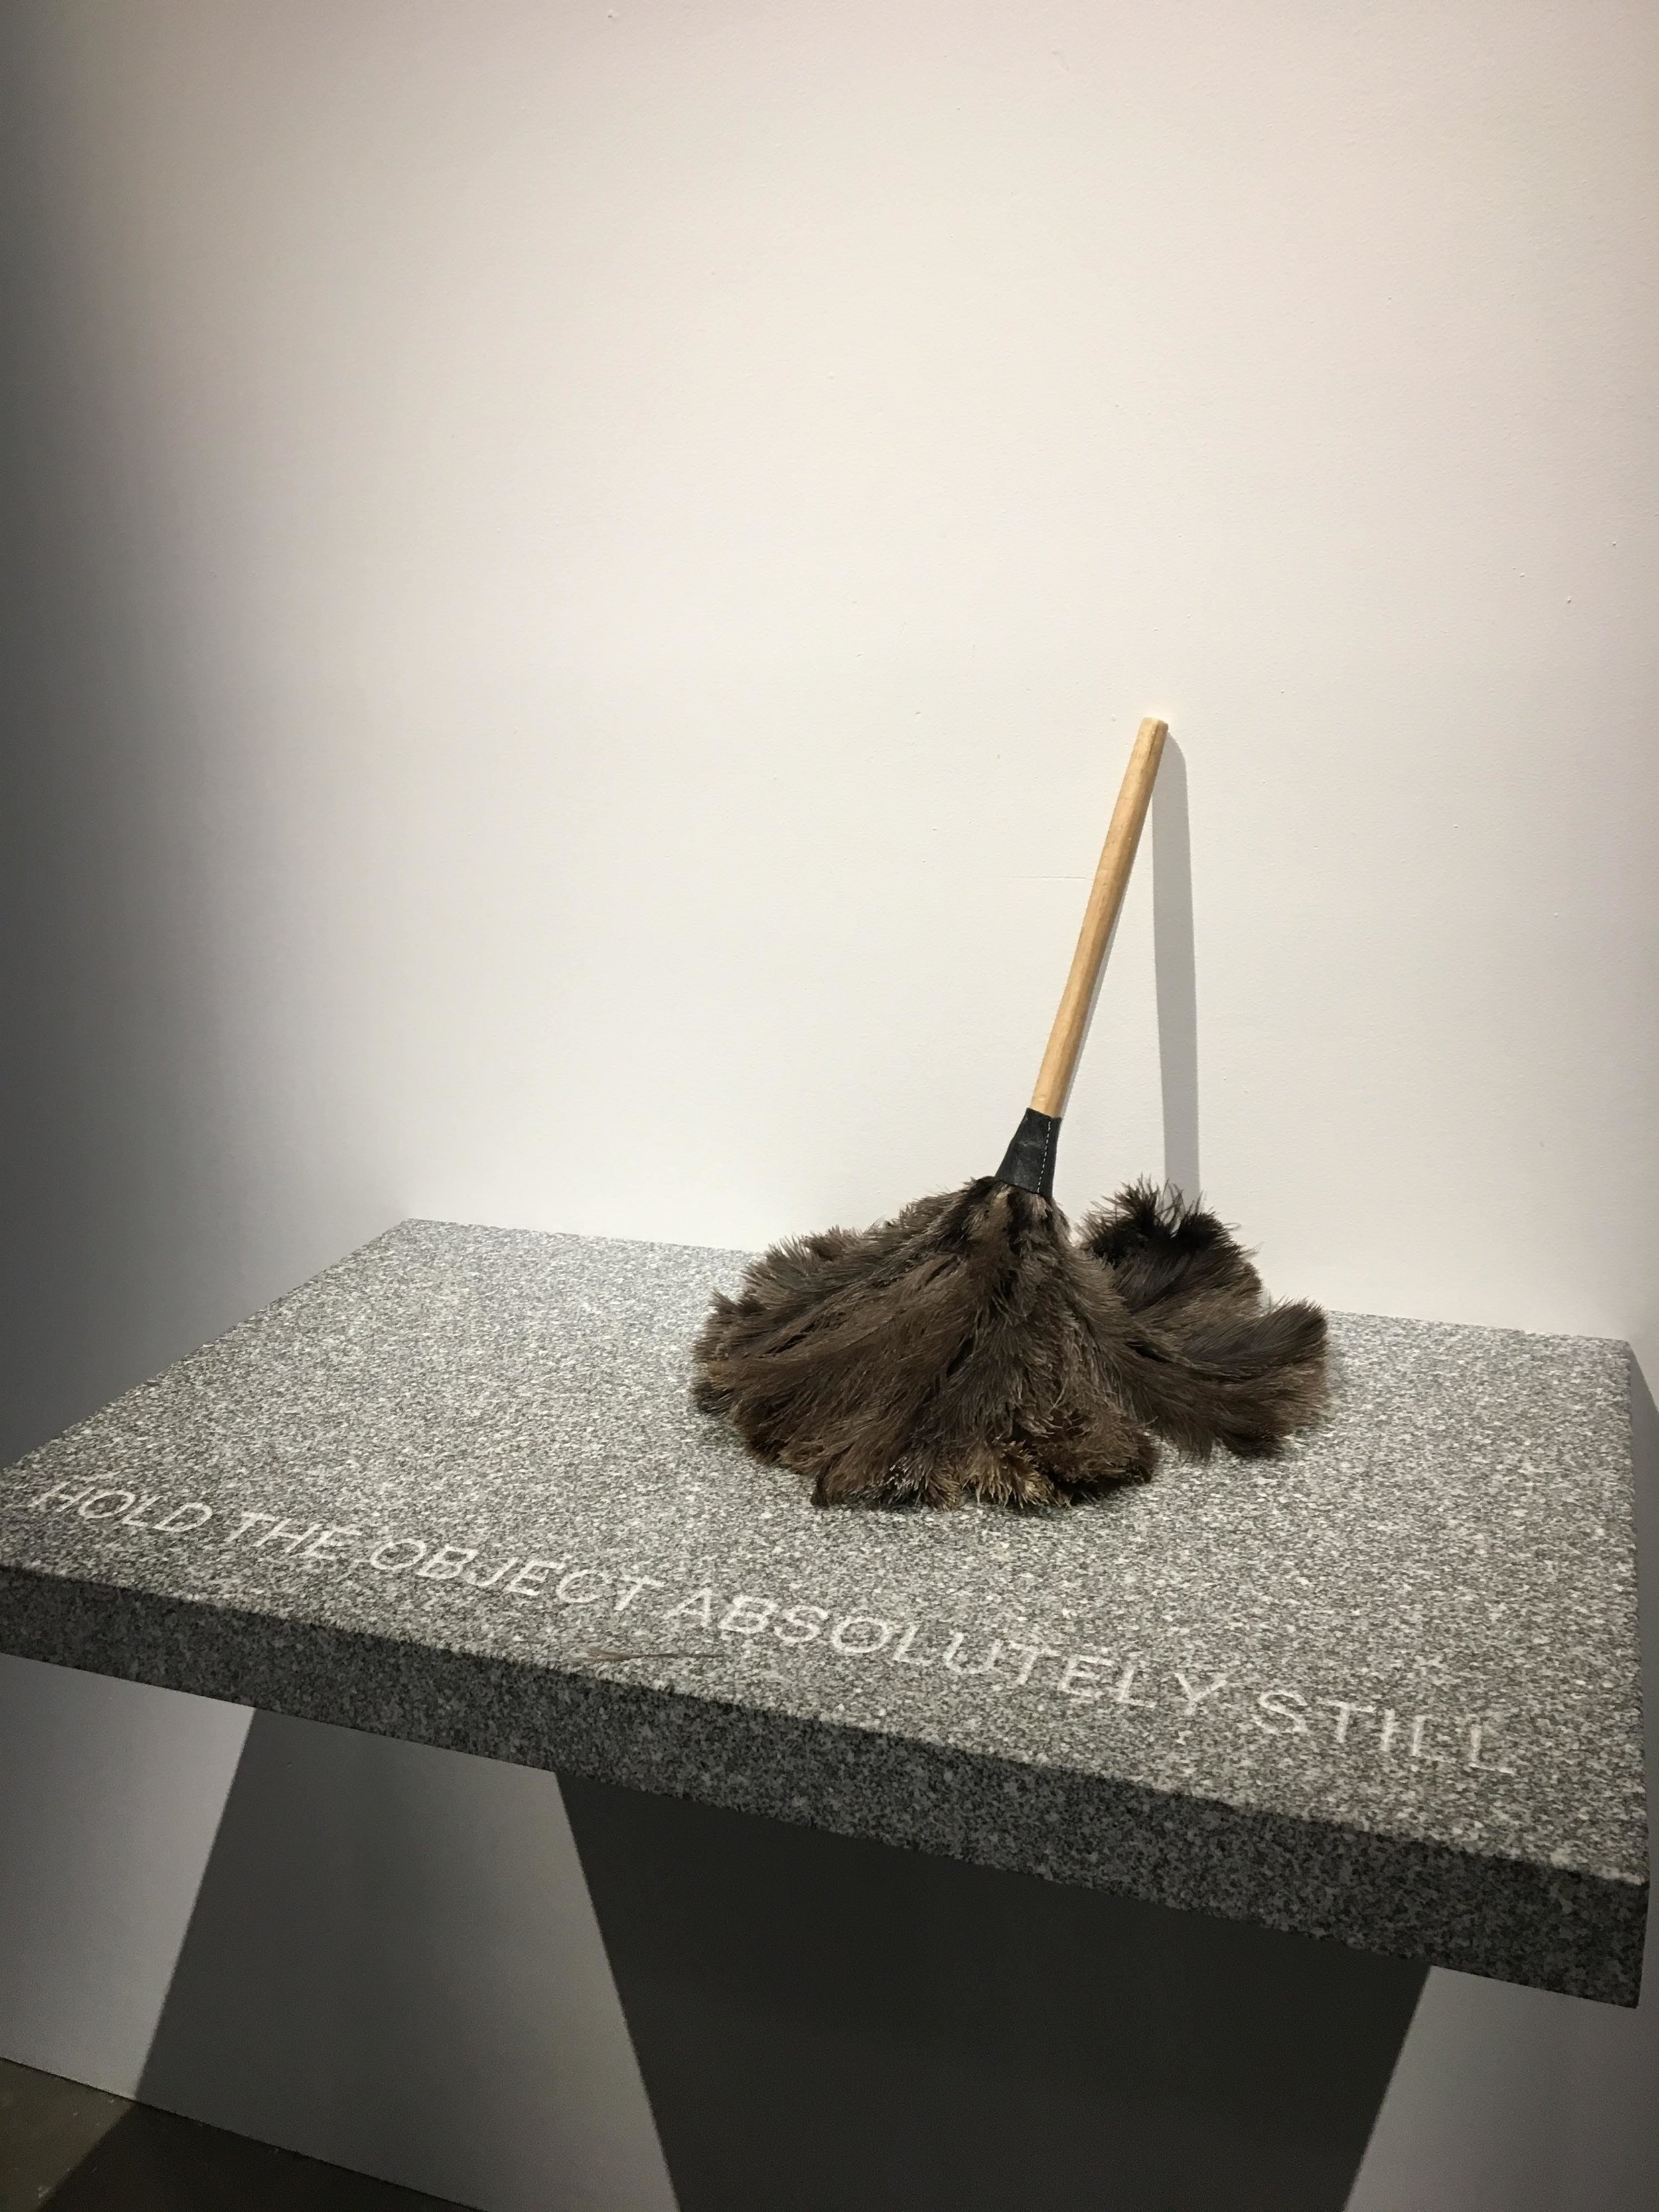 william-forsythe-ica-feather-duster.JPG